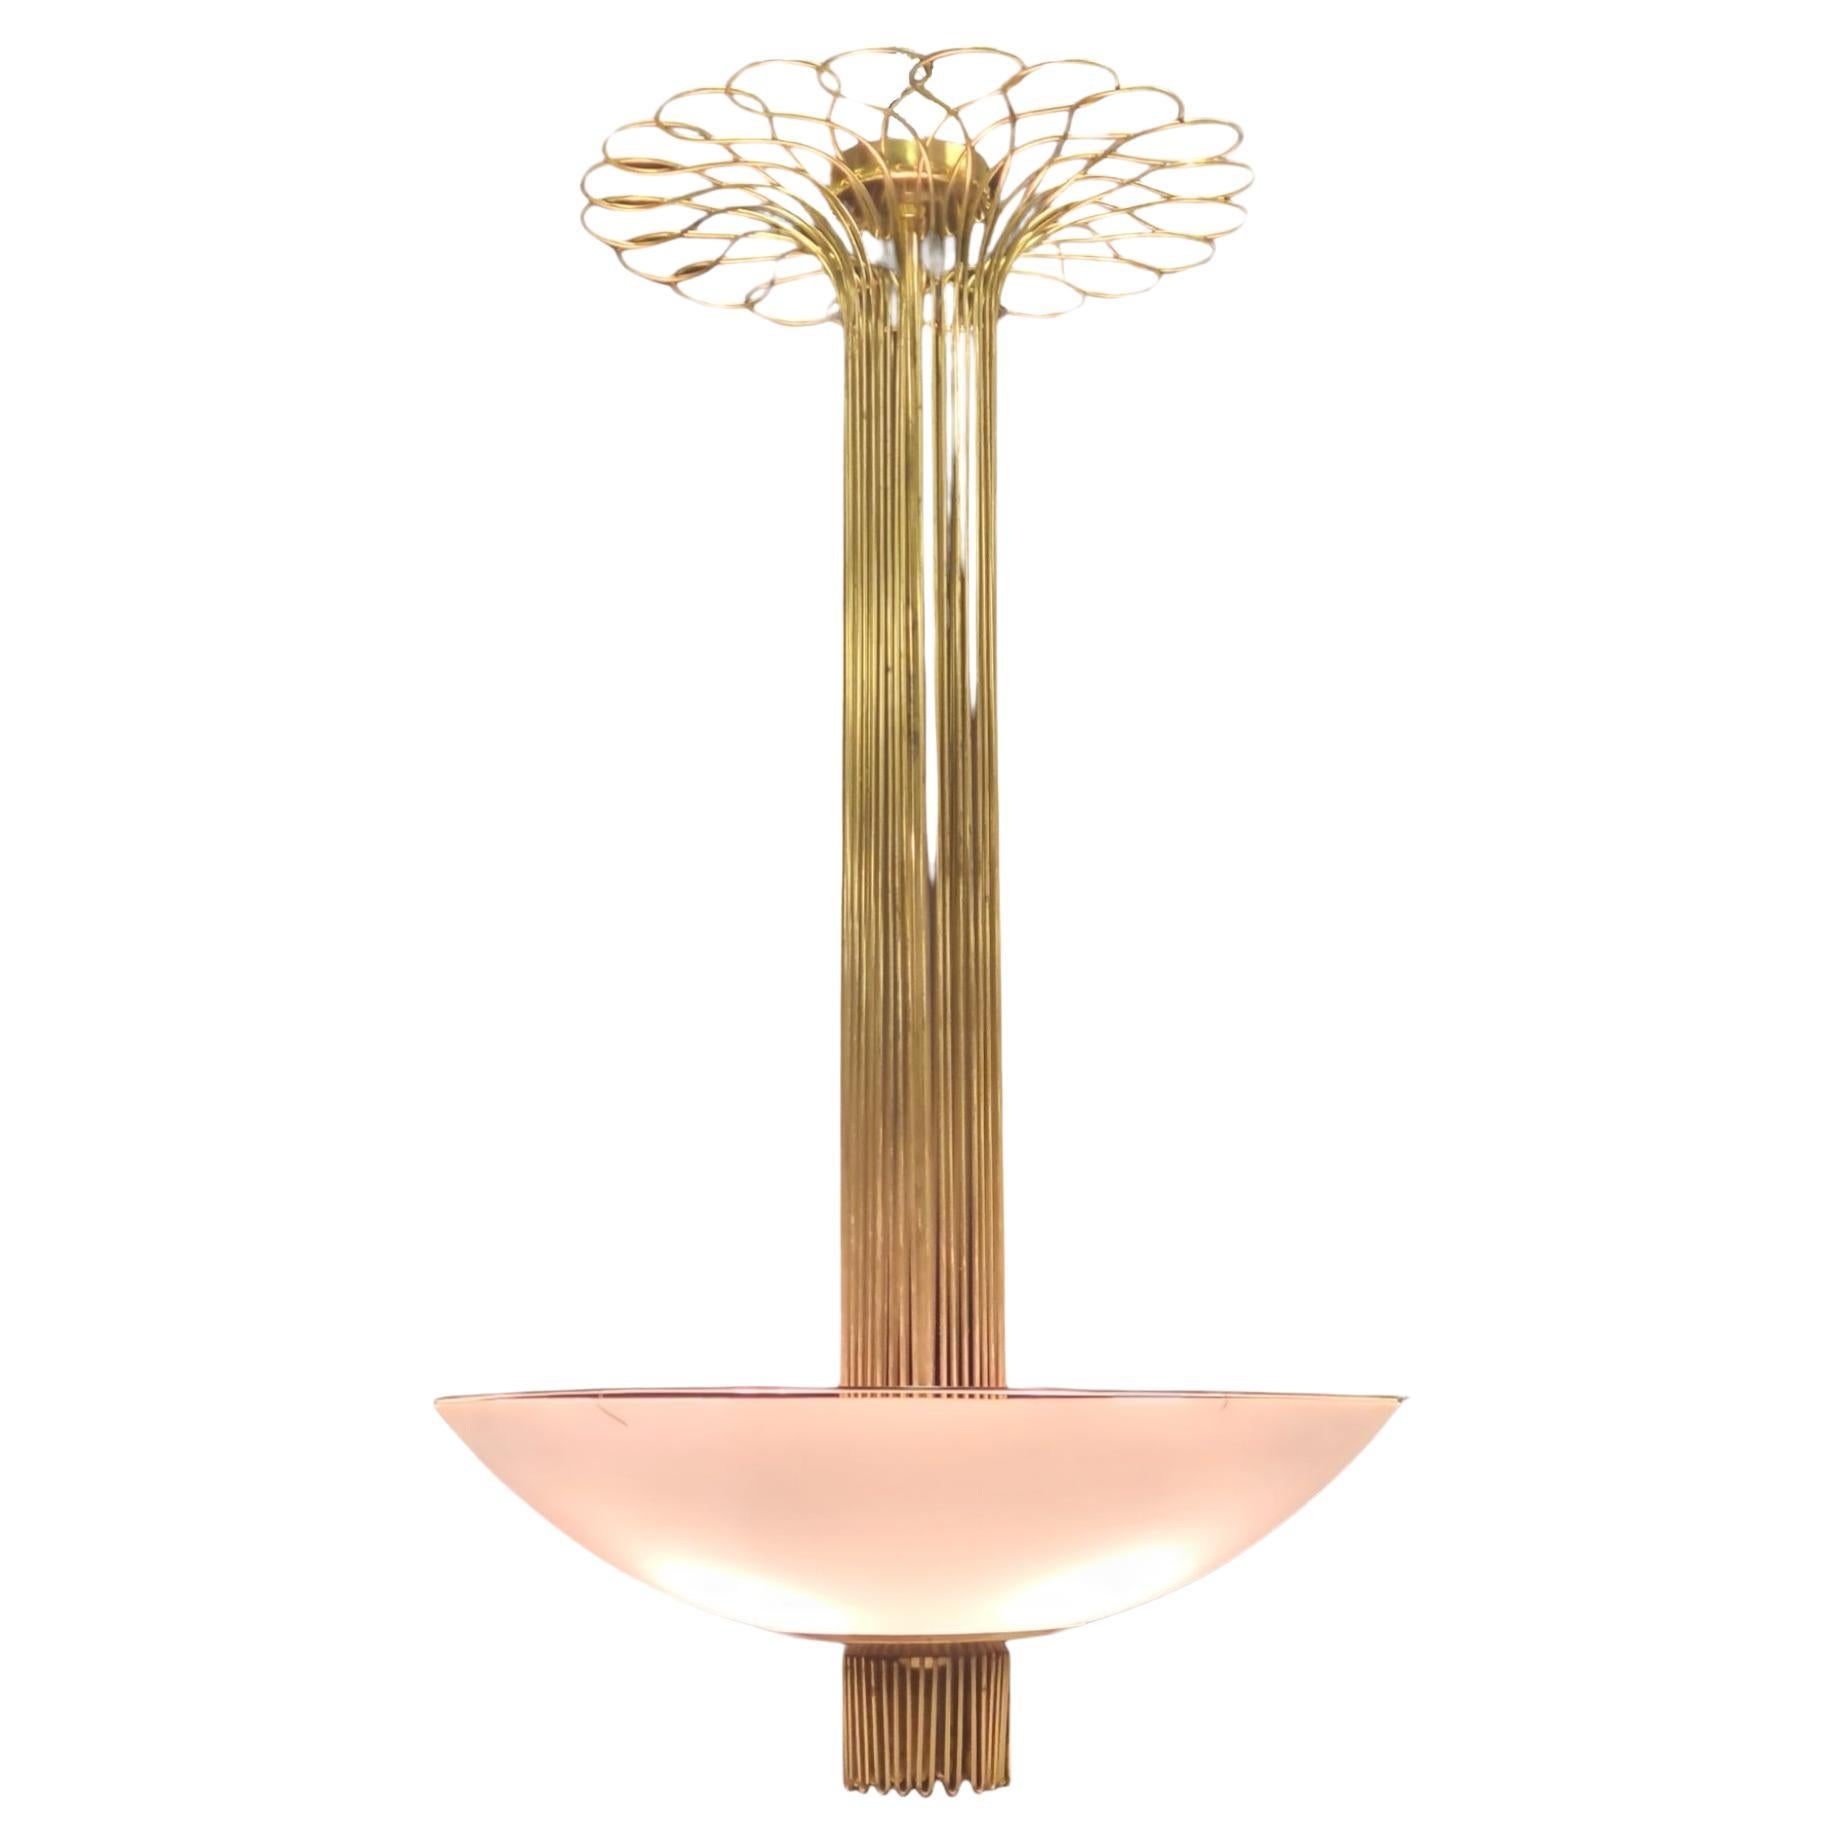 Finnish Paavo Tynell Ceiling Lamp In Brass And Glass For Sale